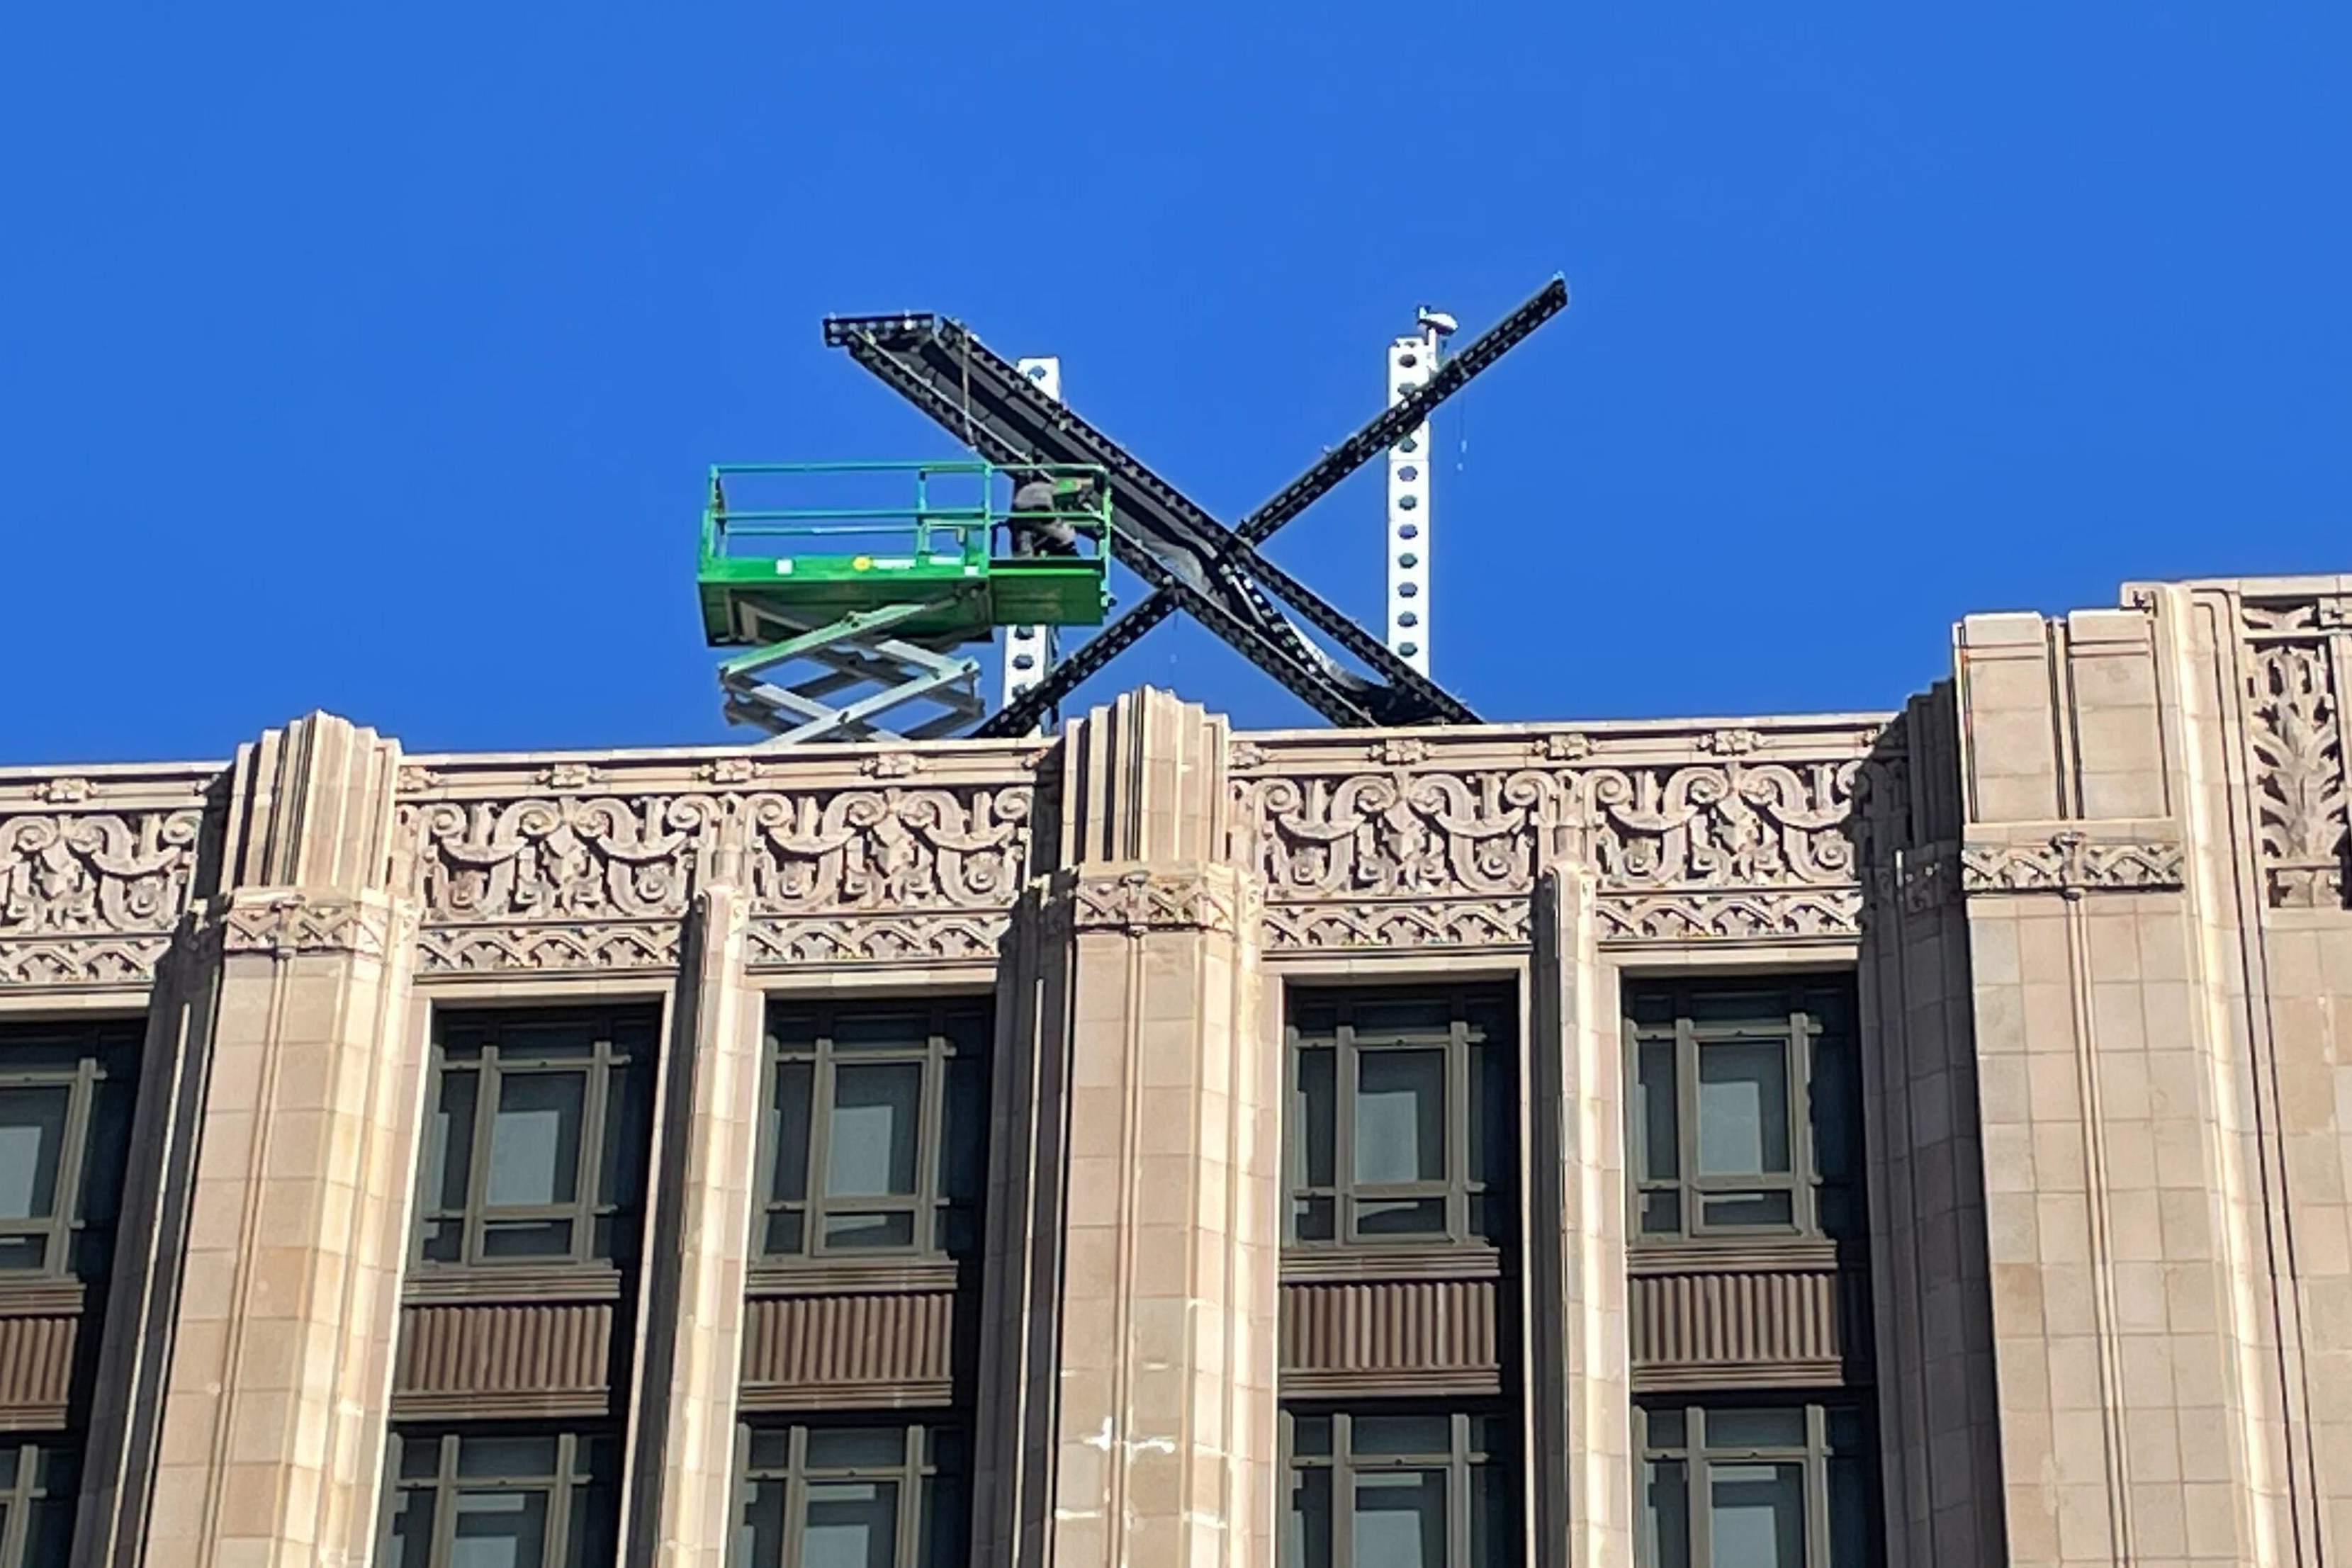 A large, metal “X” sign was installed on top of a San Francisco building formerly known as Twitter headquarters. Photo: AP
